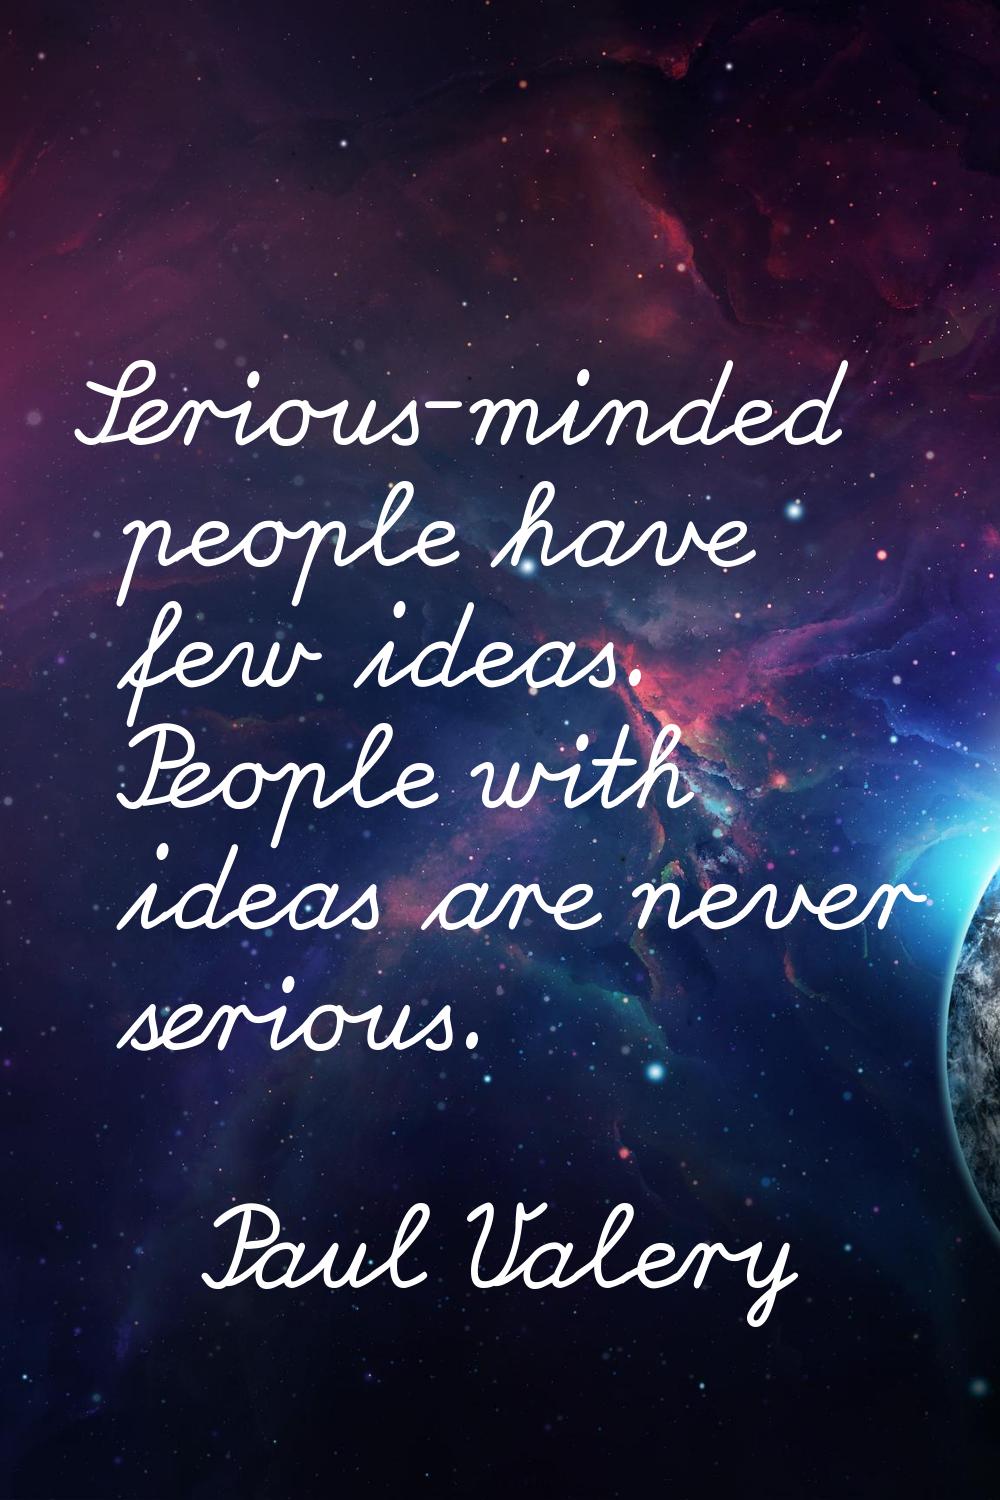 Serious-minded people have few ideas. People with ideas are never serious.